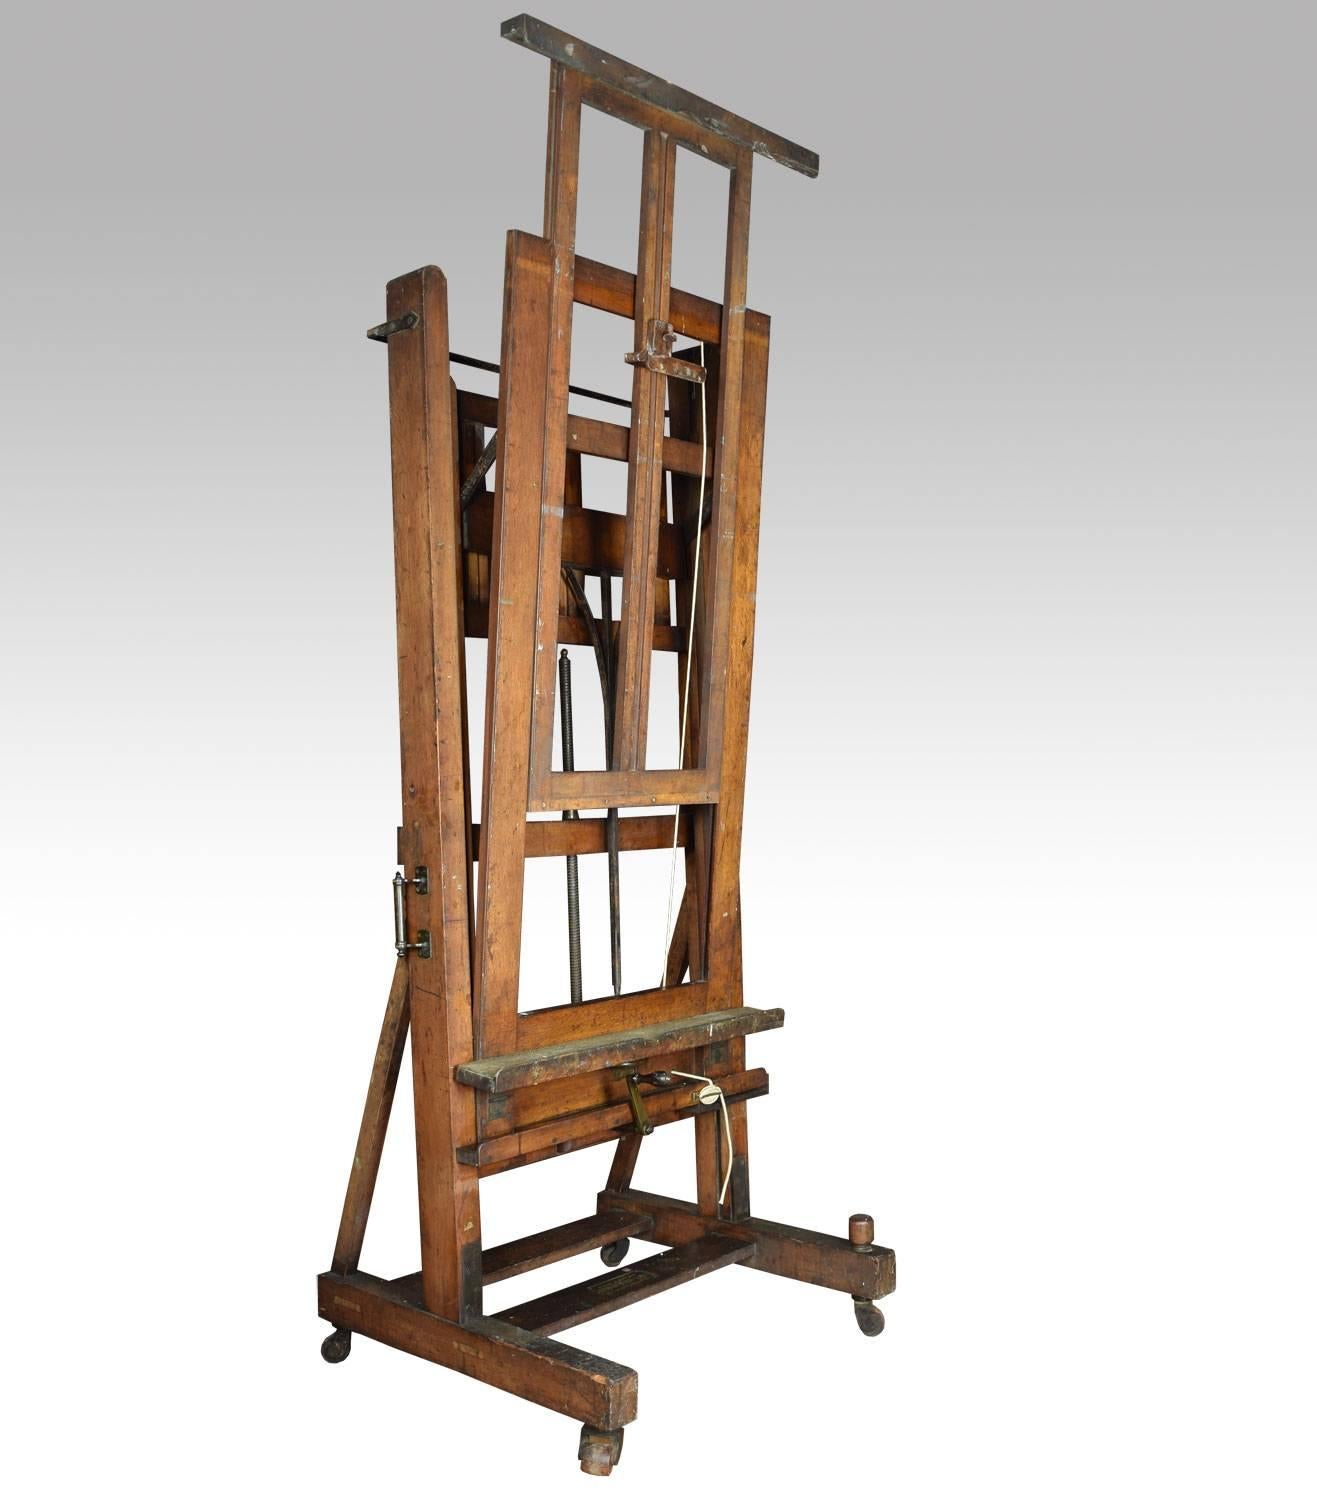 Large oak Windsor and Newton artist’s fully adjustable studio easel raised up on trestle base terminating in four lignum vitae casters.

Dimensions:

Height 161 when fully extended 86.5 inches when closed.

Width 37 inches.

Depth 32 inches.